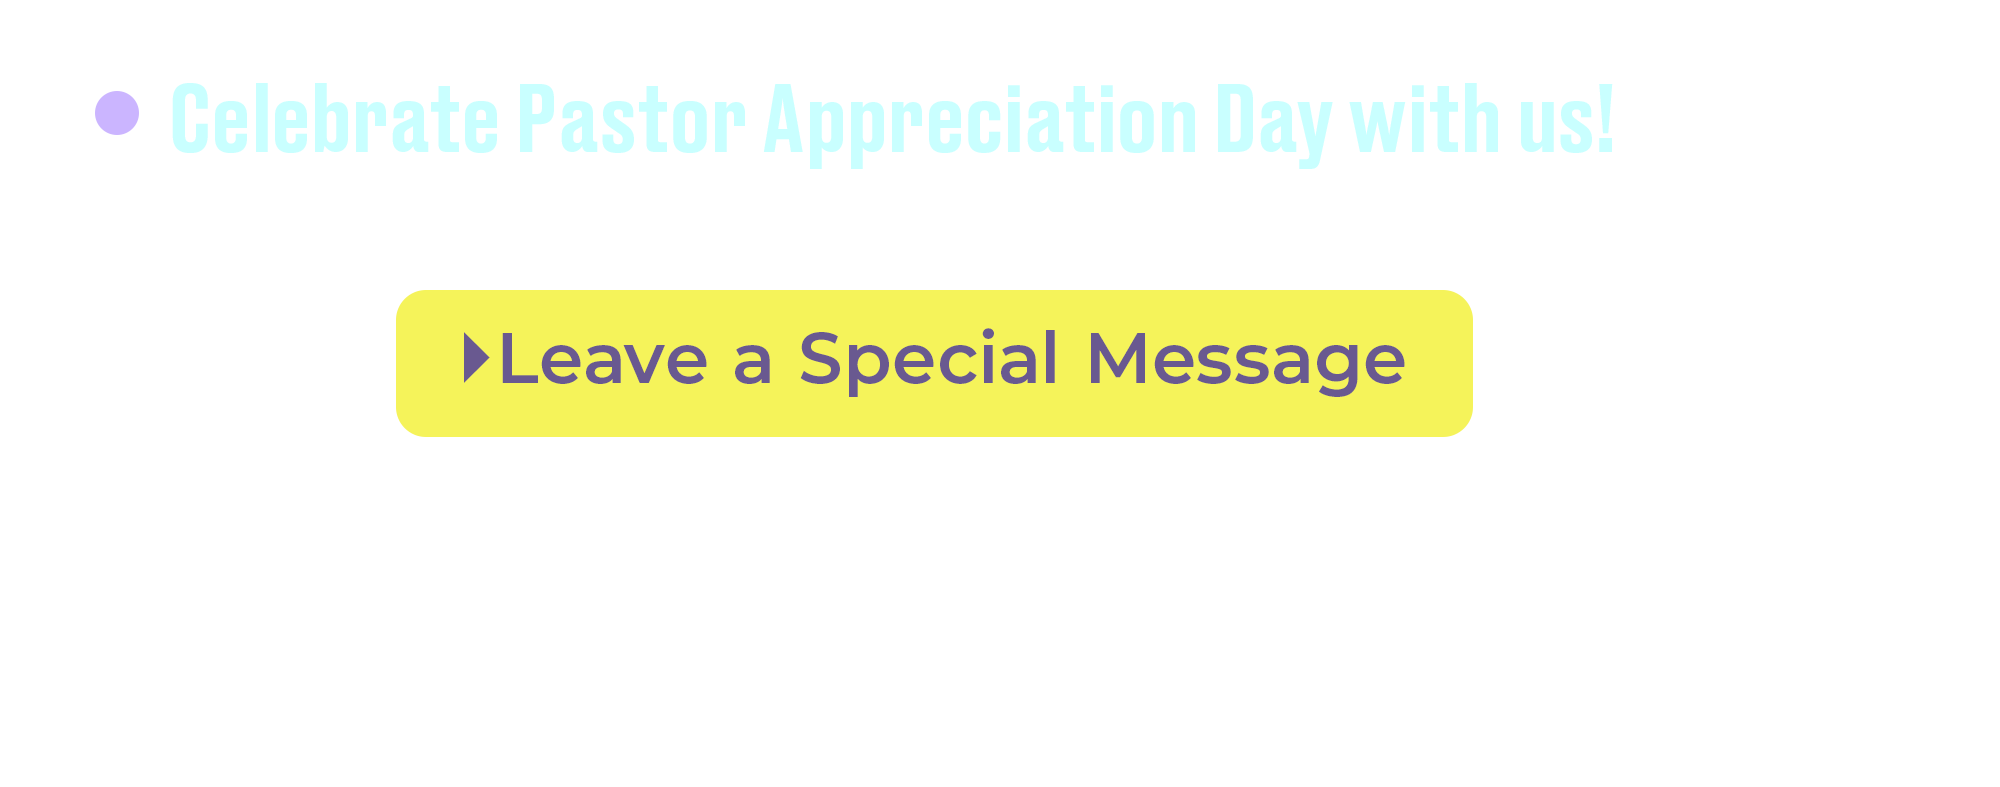 Celebrate Pastor Appreciation Day with us! Leave a Sepcial Message